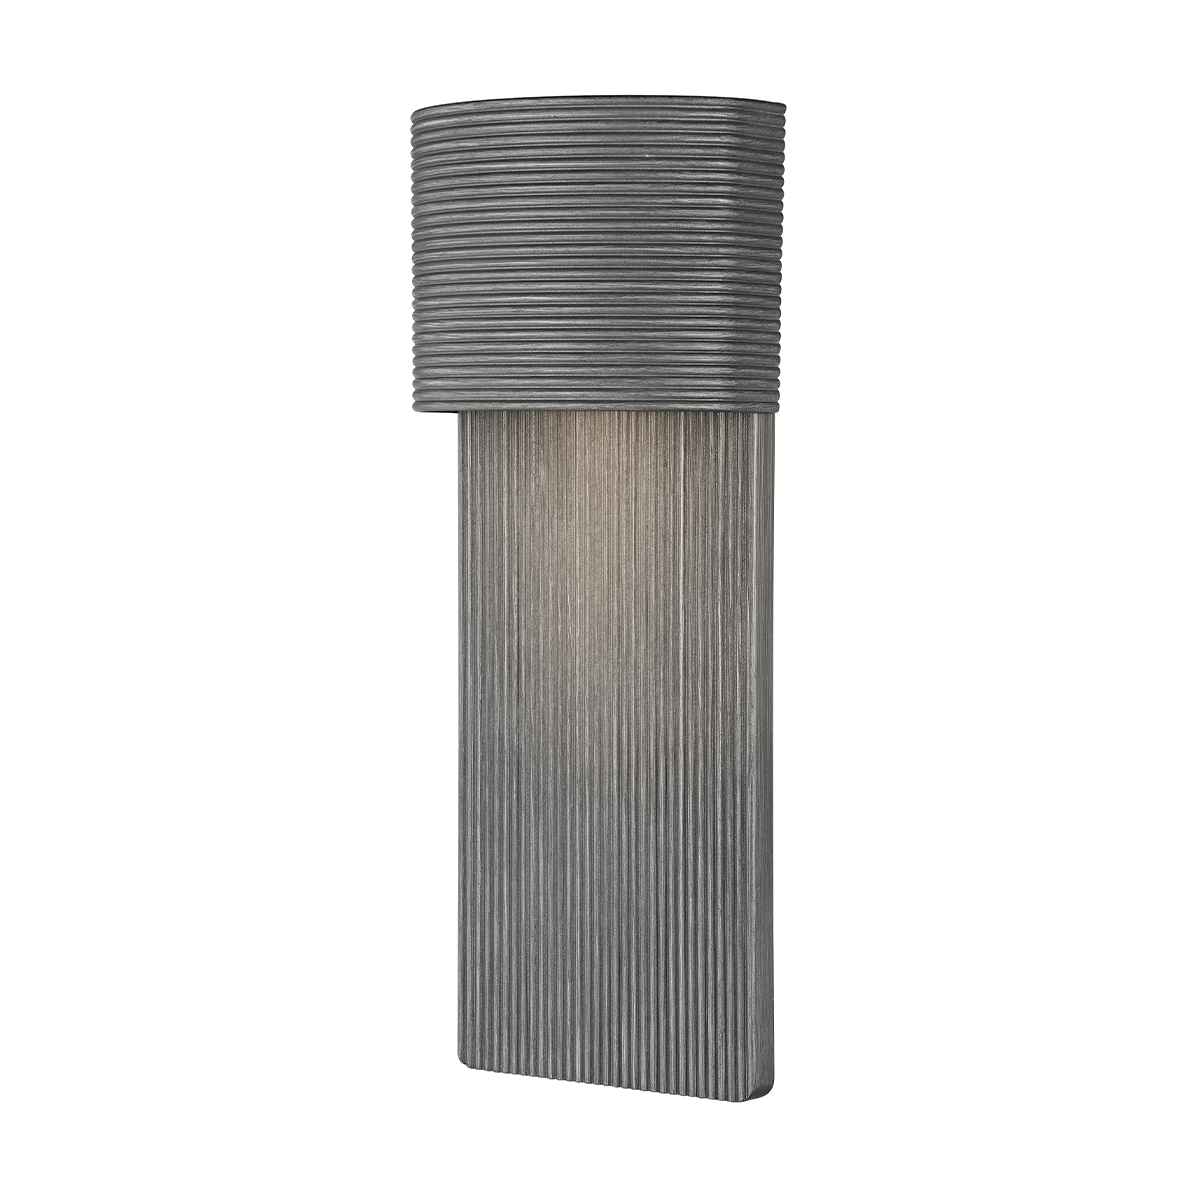 Troy Lighting 1 LIGHT LARGE EXTERIOR WALL SCONCE B1217 Outdoor l Wall Troy Lighting GRAPHITE  